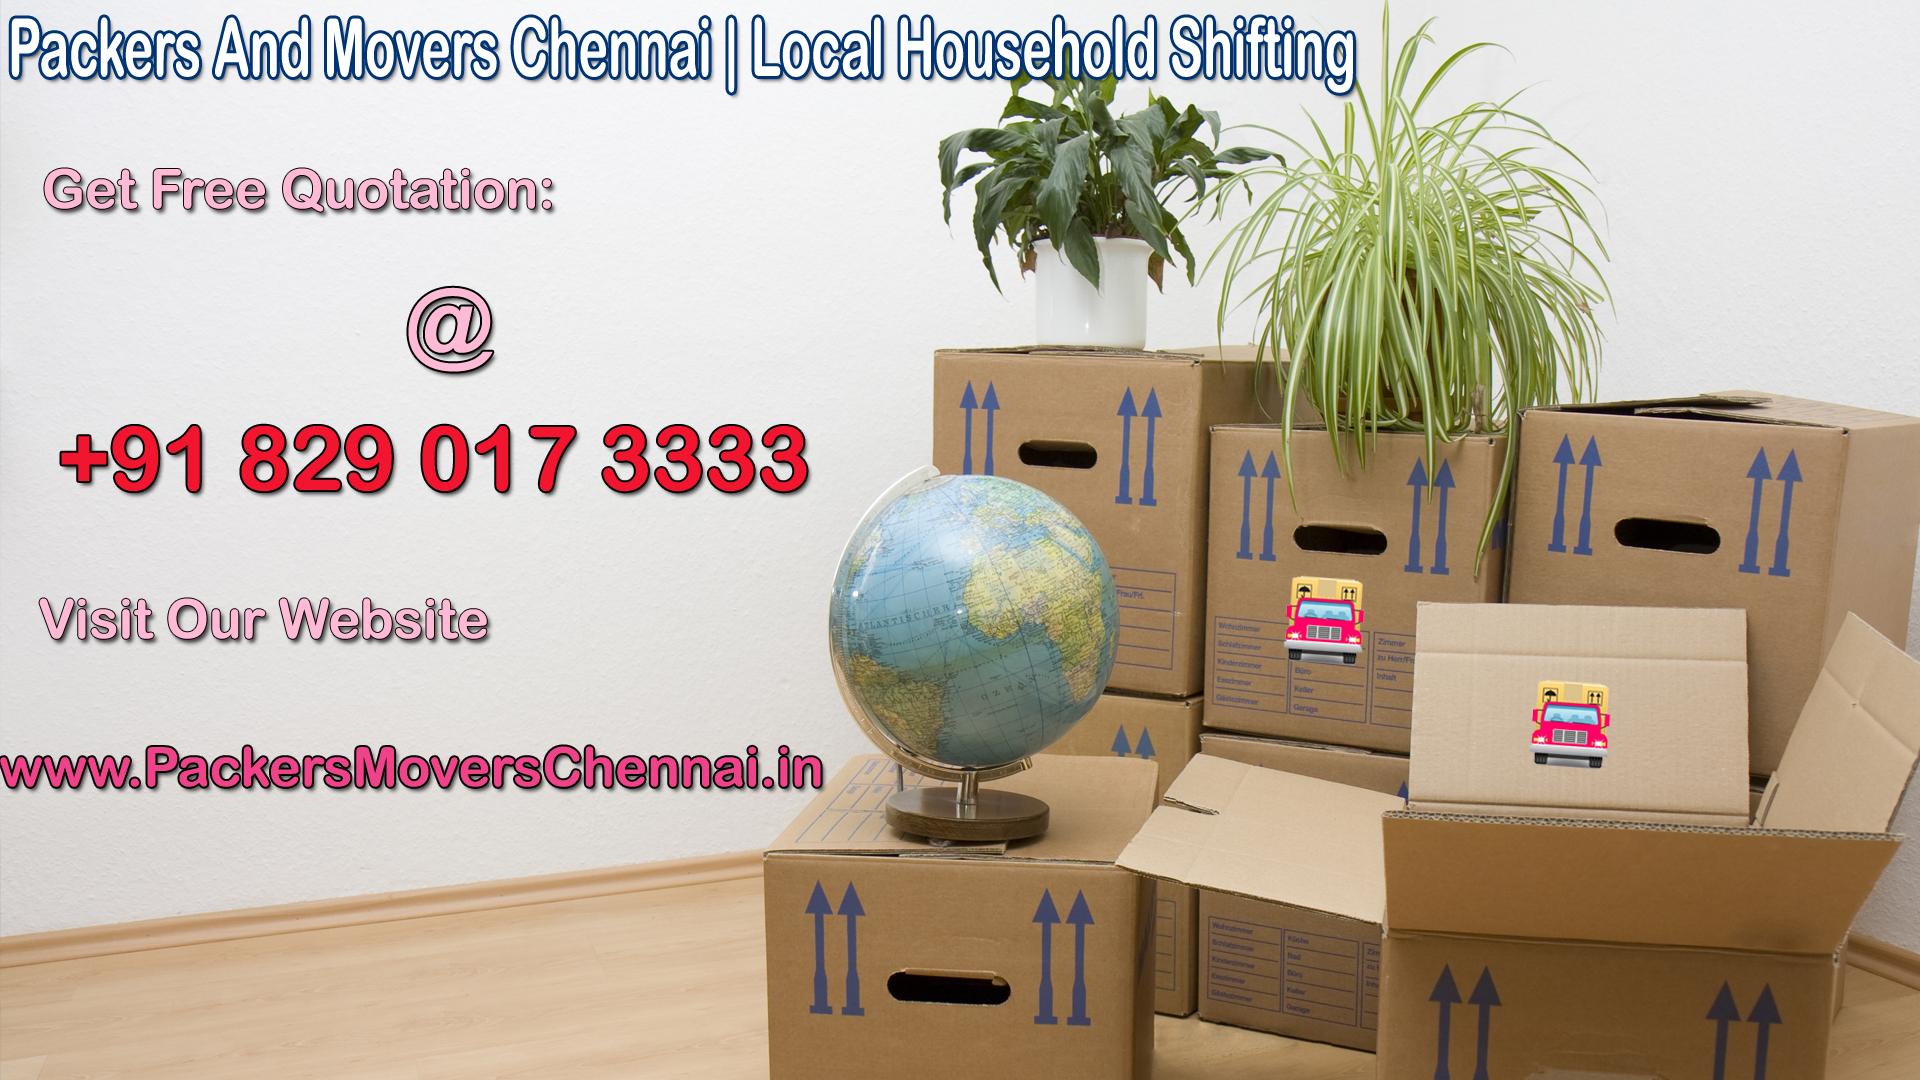 Packers And Movers Chennai  Get Free Quotes  Compare and Save